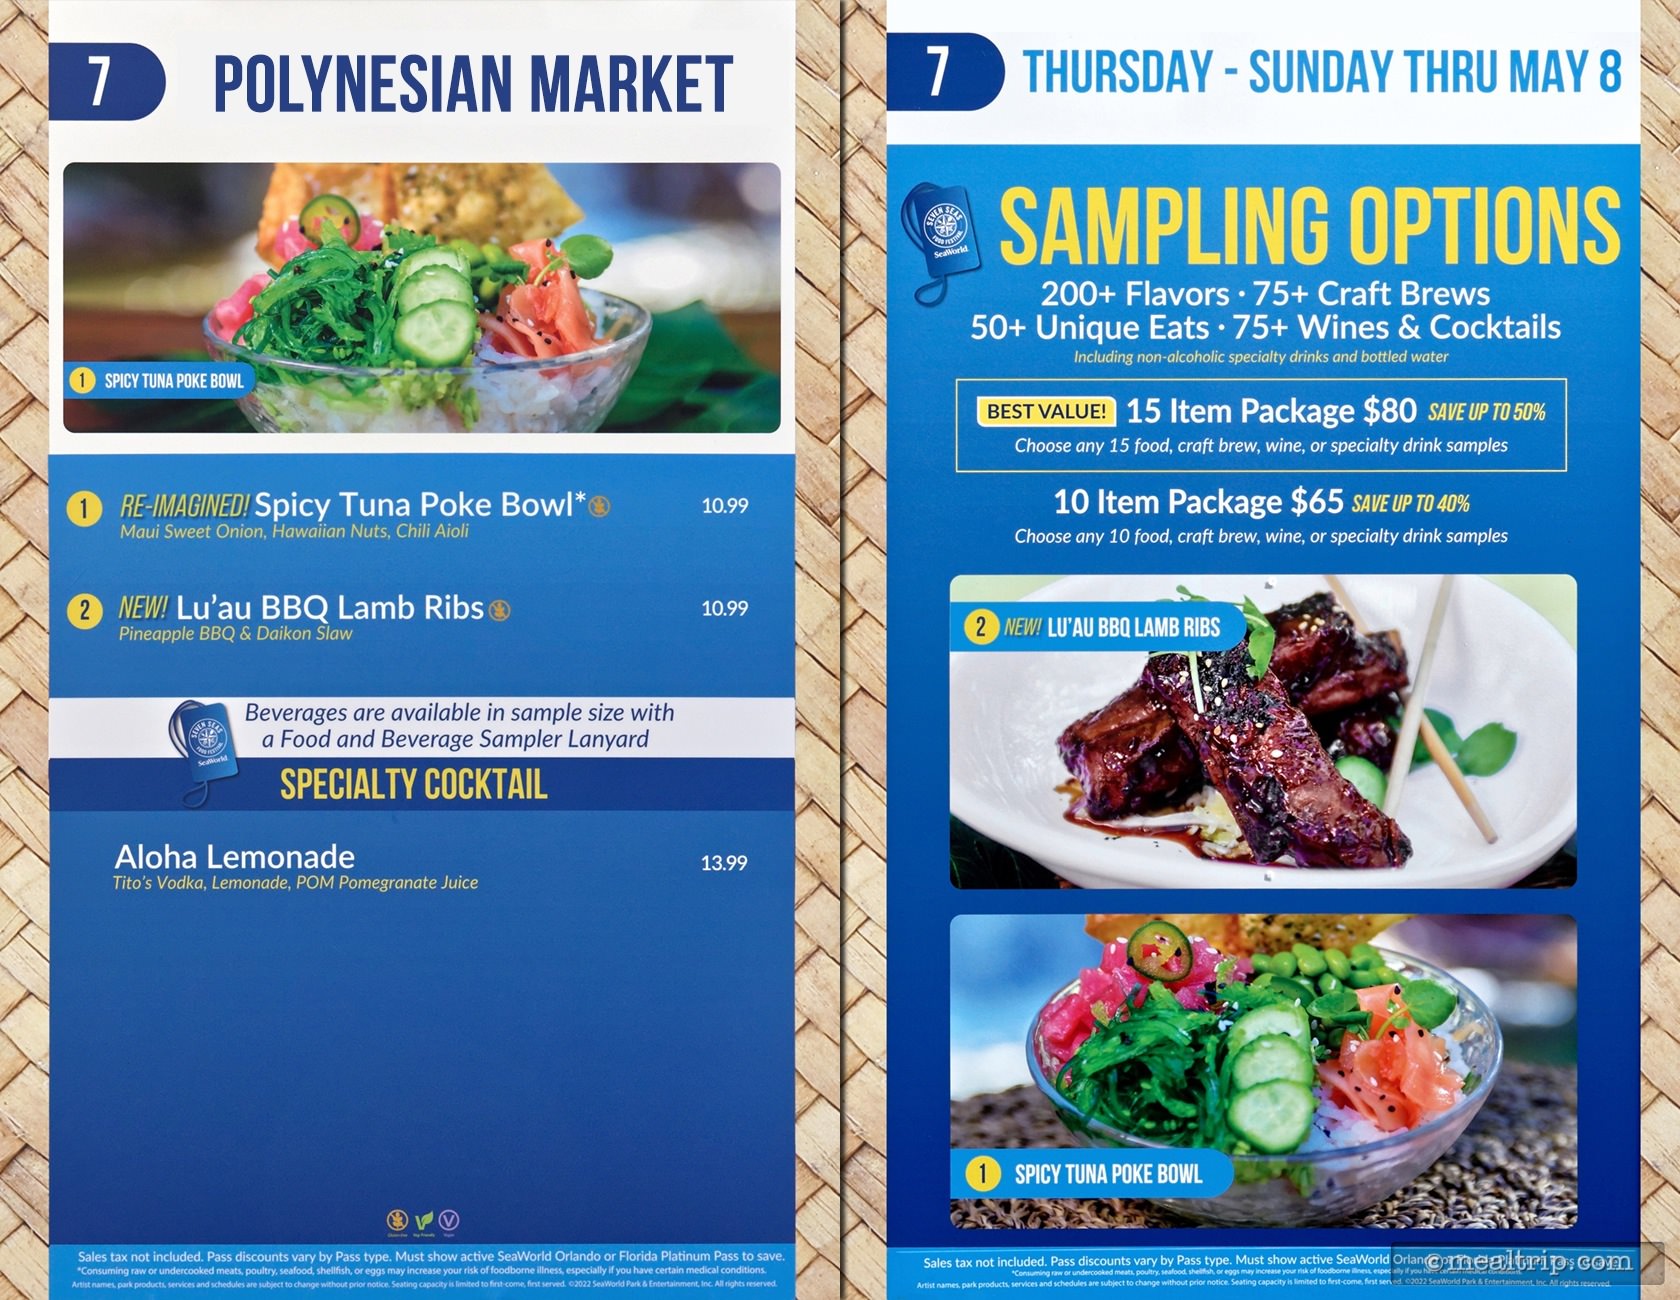 Polynesian Market Menu Boards with Prices